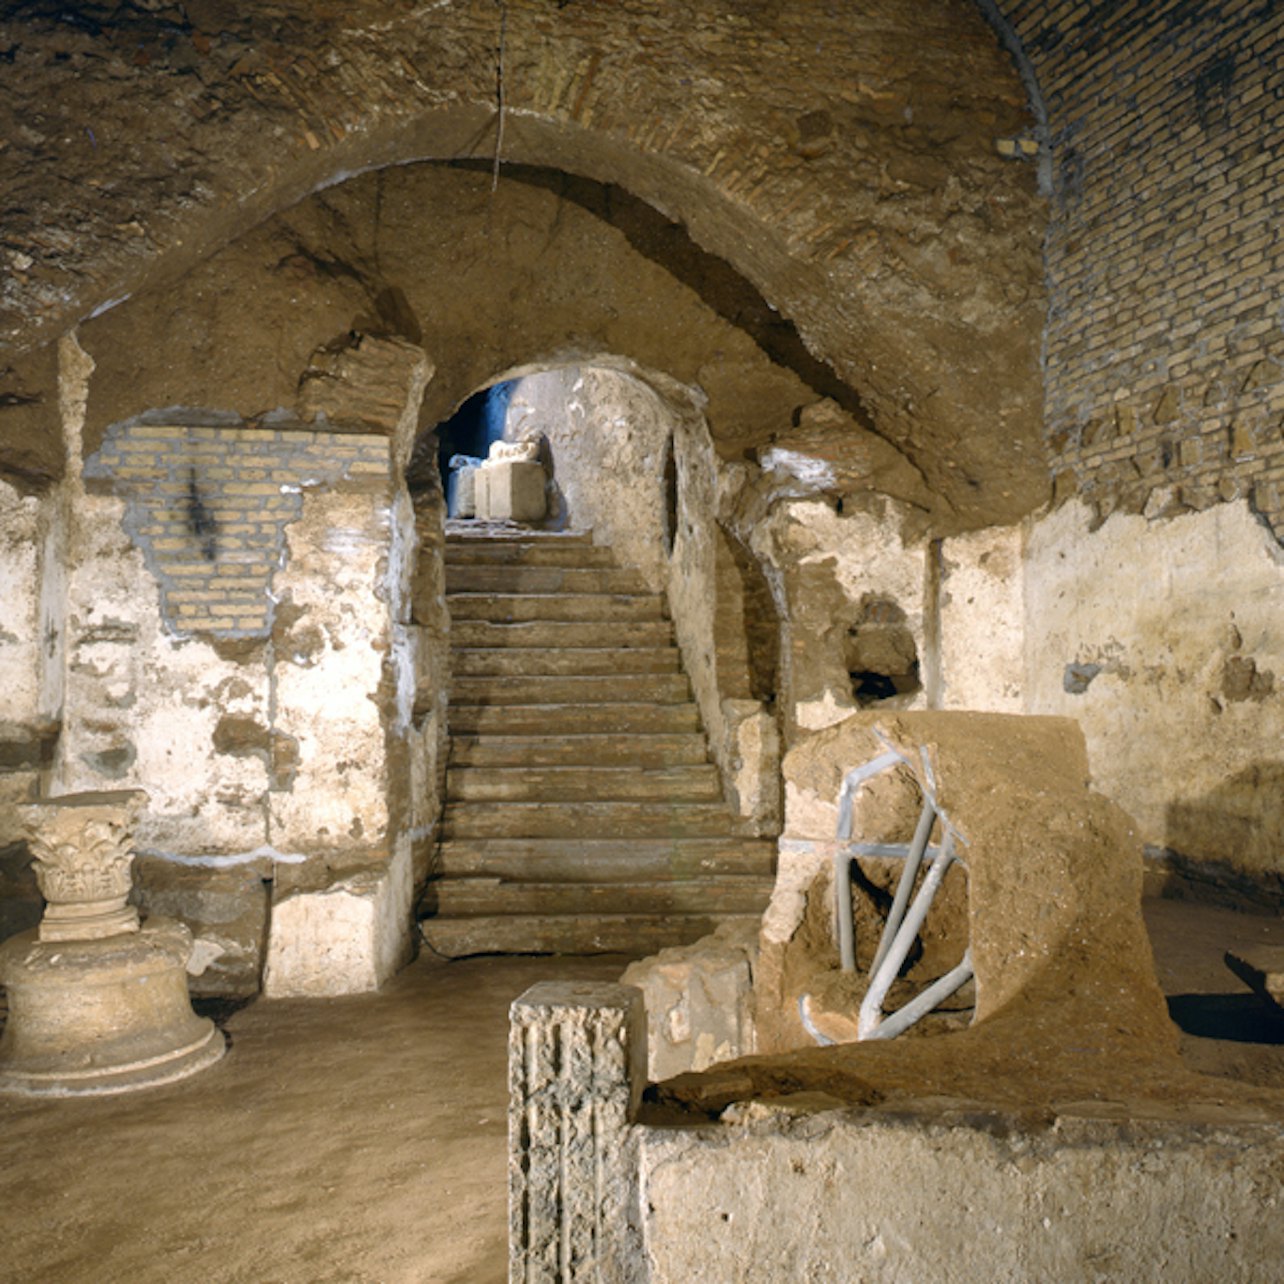 The Catacombs of Saints Marcellin and Peter: Guided Tour - Accommodations in Rome